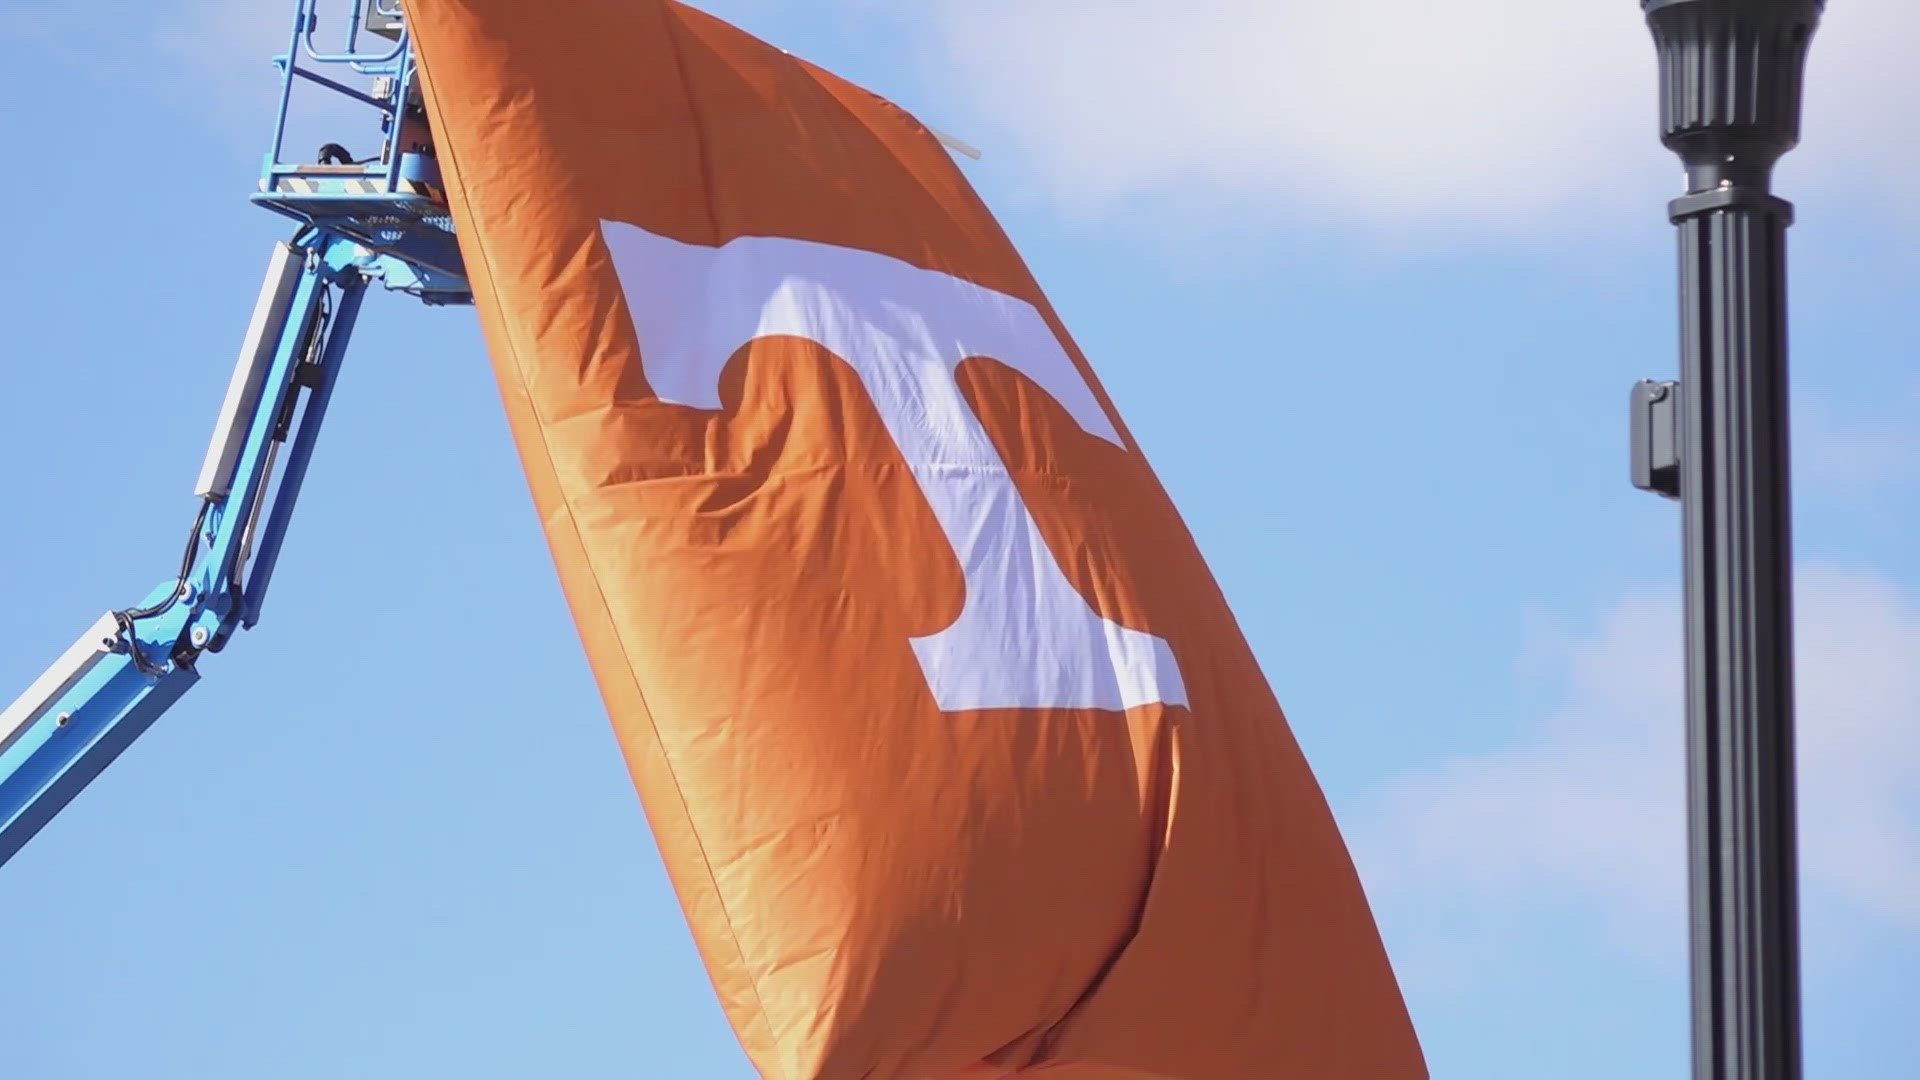 Outside the courtroom, there was no question where most East Tennesseans sided as people raised a Big Orange flag.